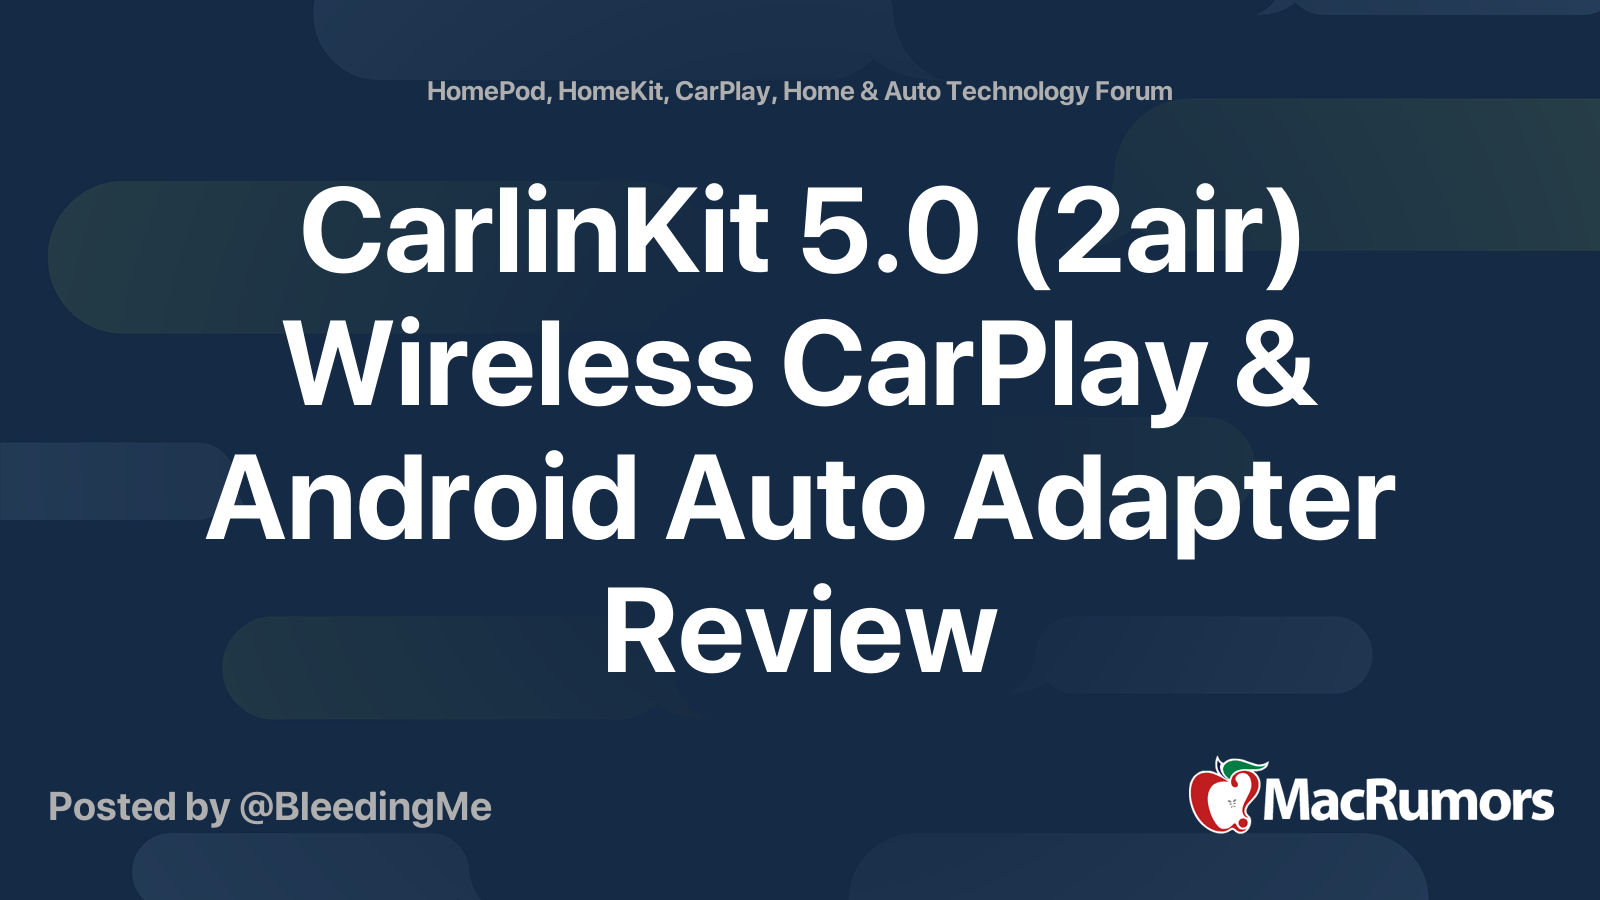 CarlinKit 5.0 (2air) Wireless CarPlay & Android Auto Adapter Review